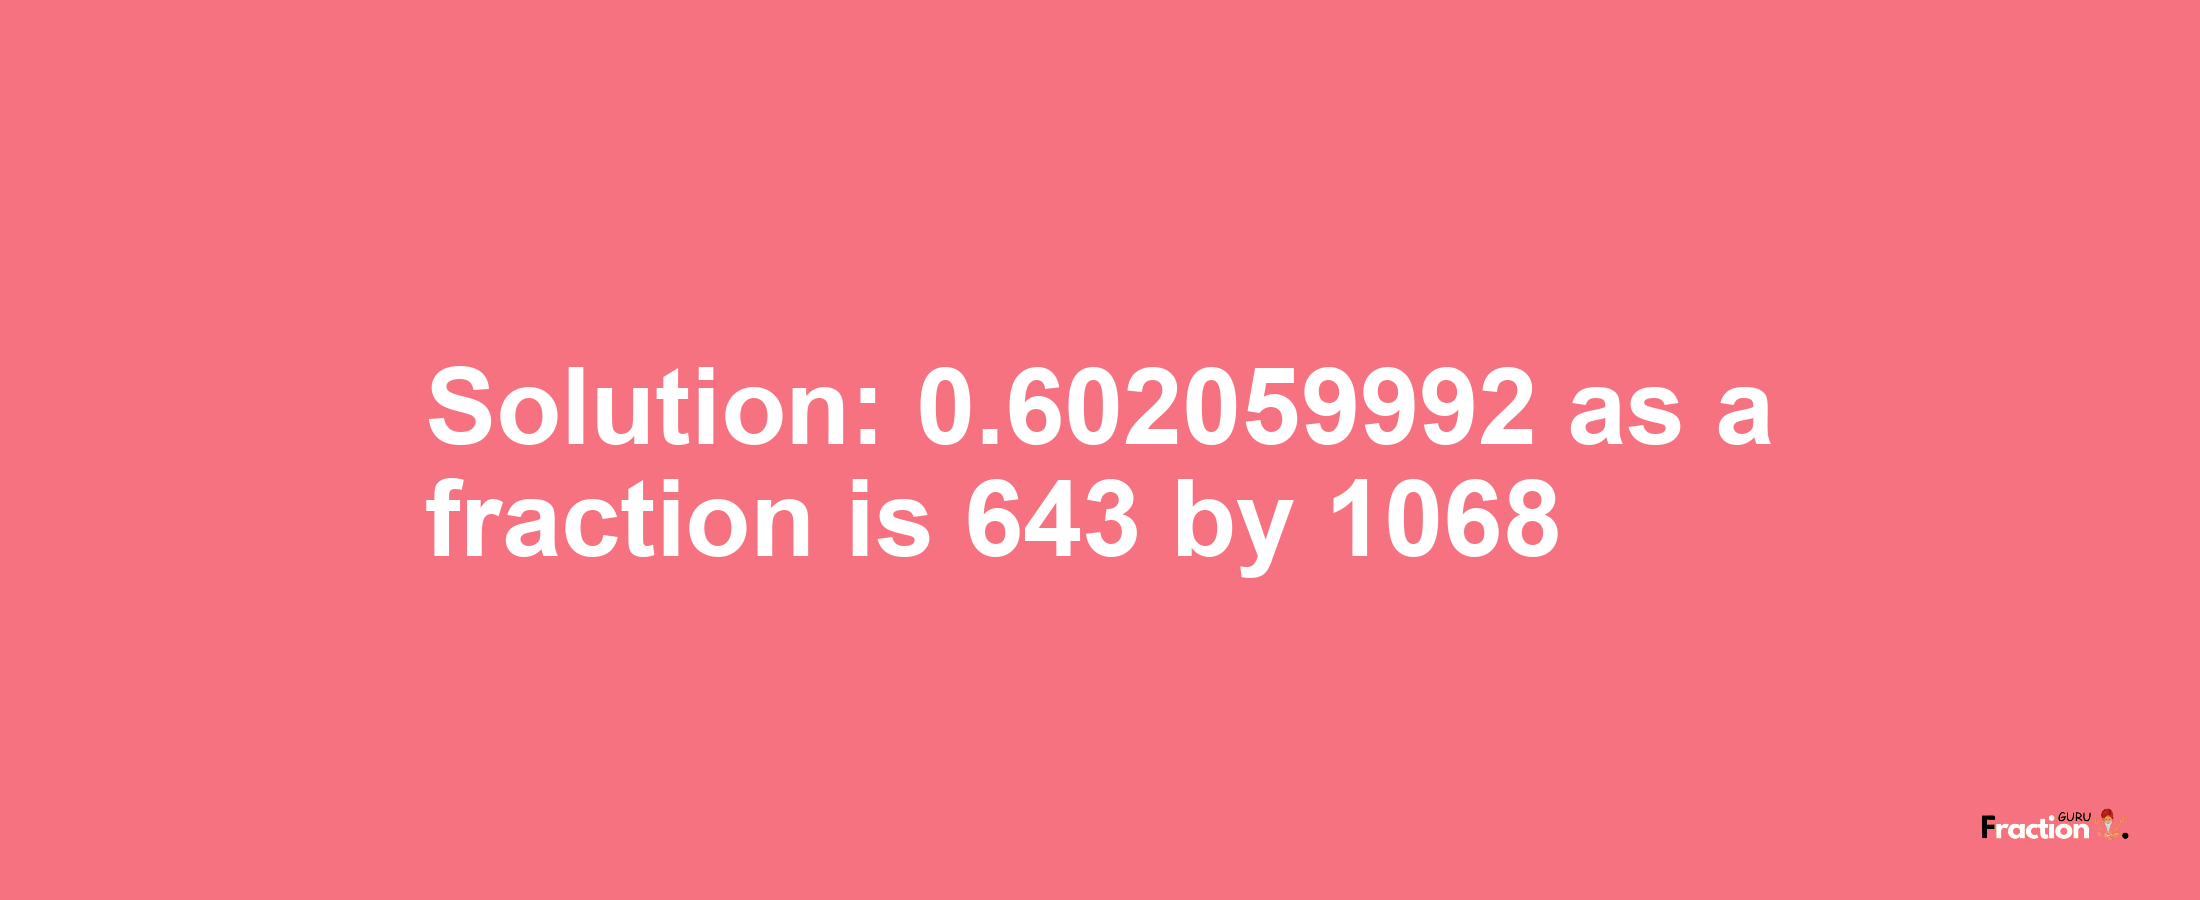 Solution:0.602059992 as a fraction is 643/1068